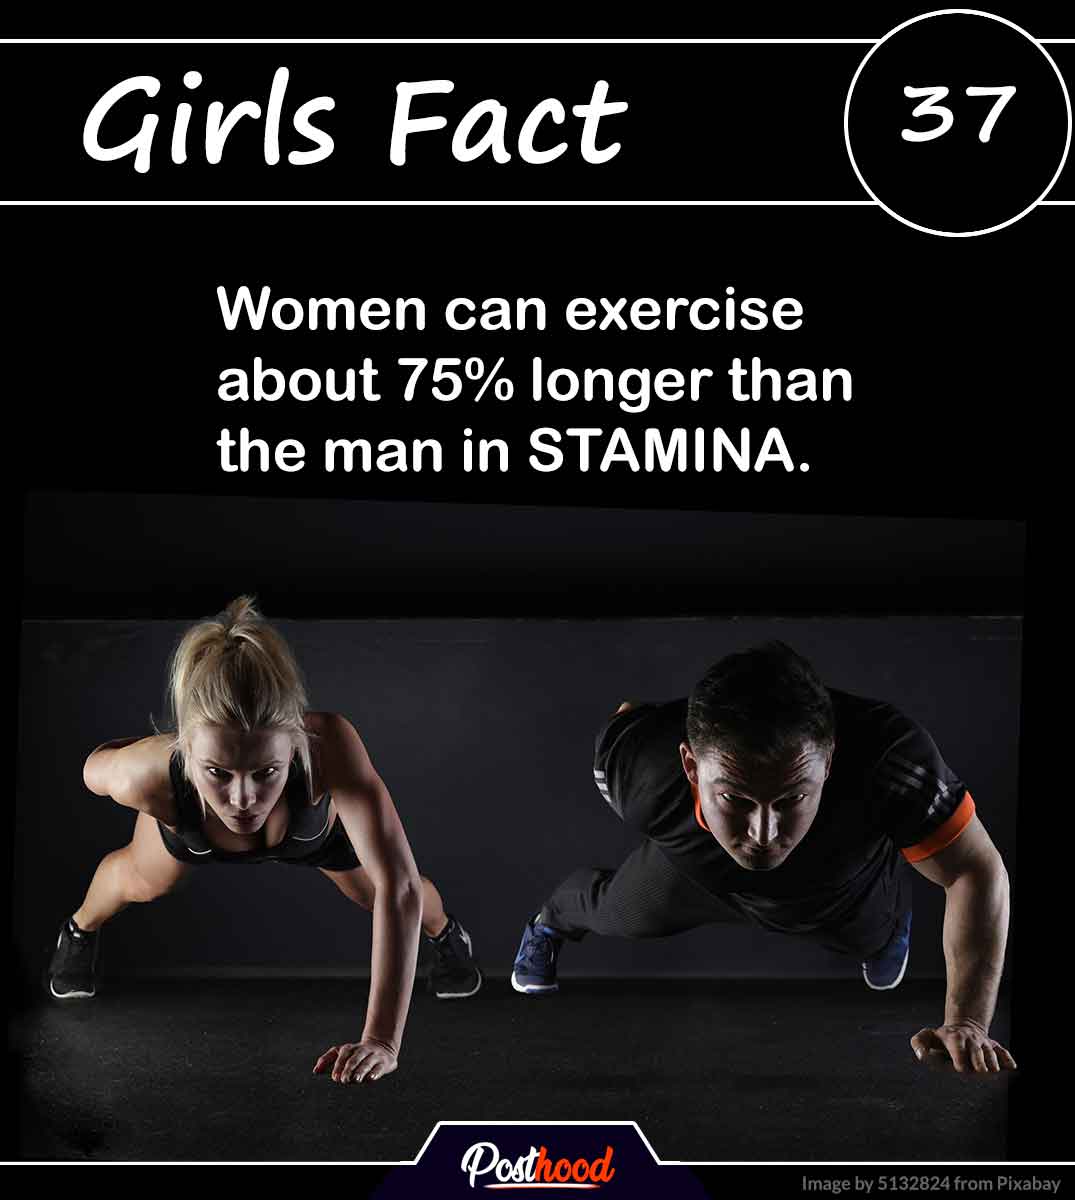 The tag of wonder Woman is absolutely true when it comes to workout-in-stamina. Know more amazing facts about women's body and humor that will amaze you.